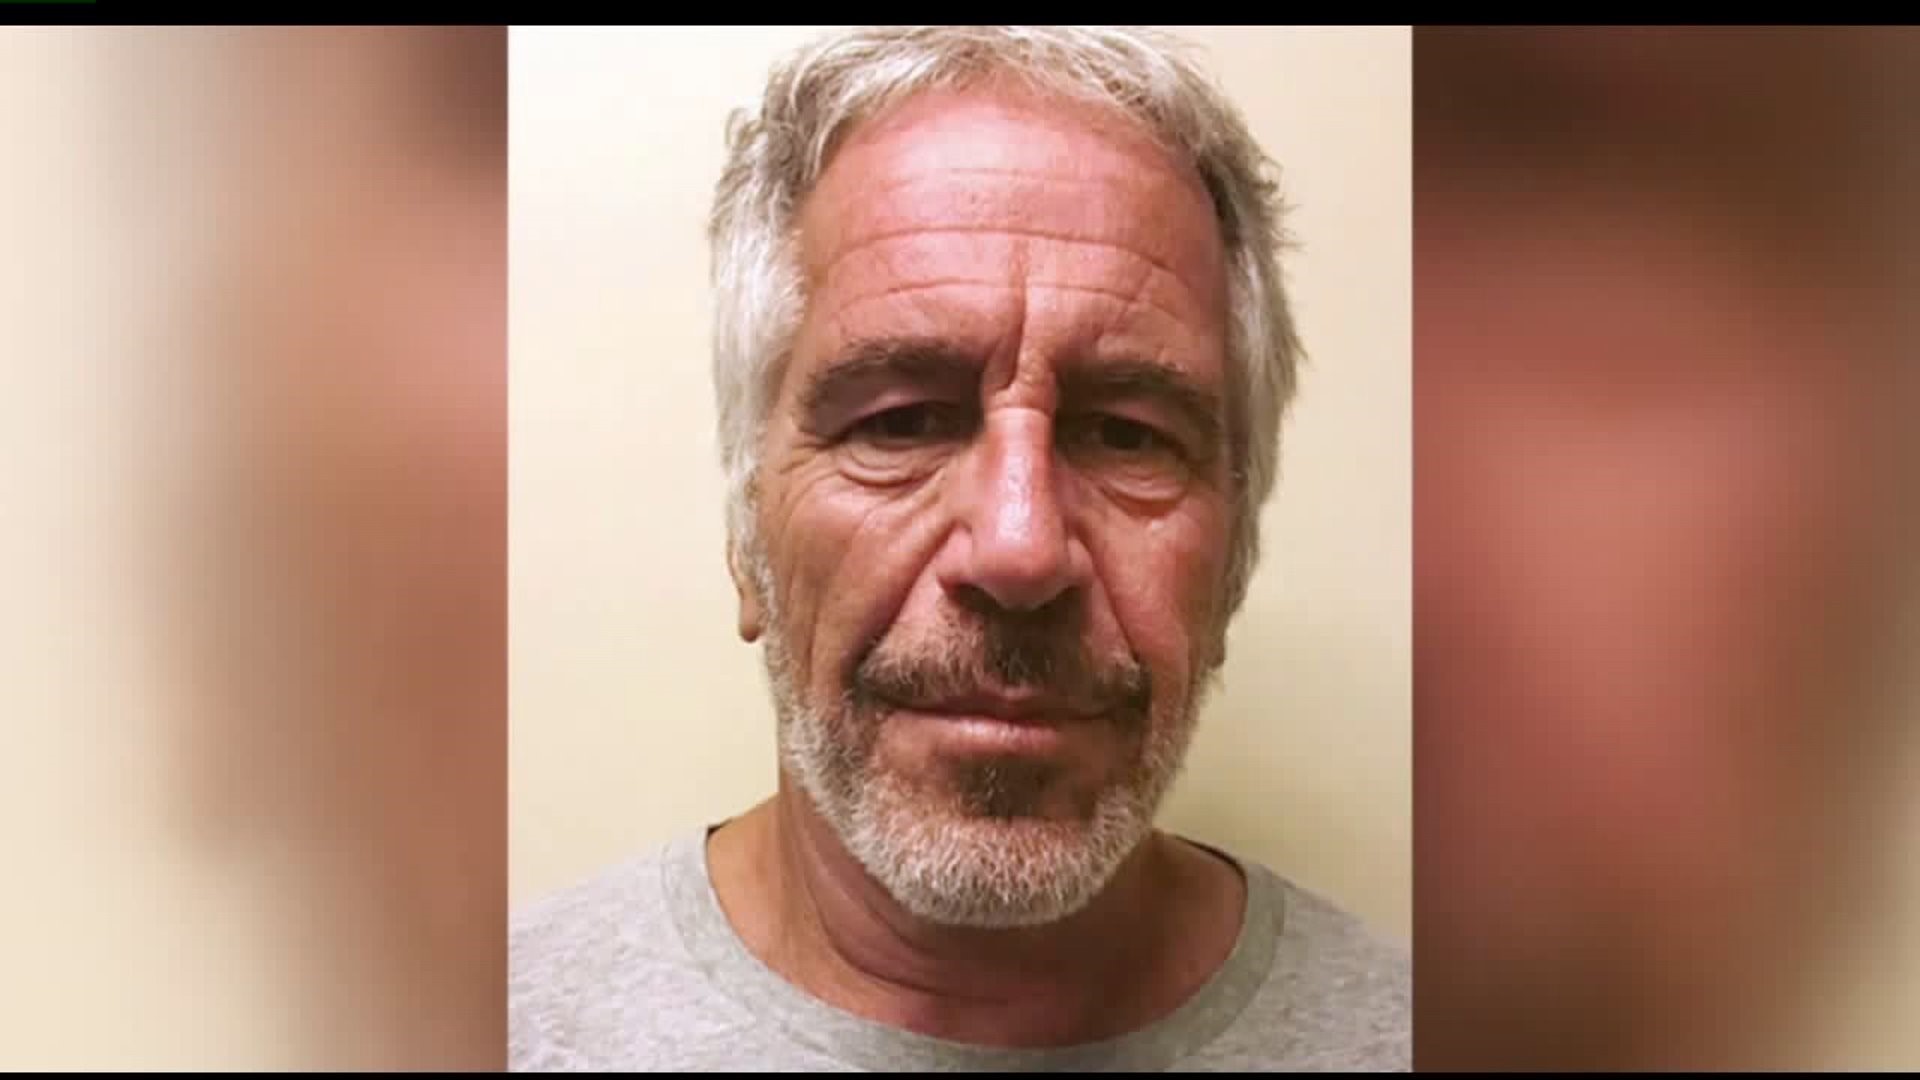 Jeffrey Epstein has died by suicide, sources say